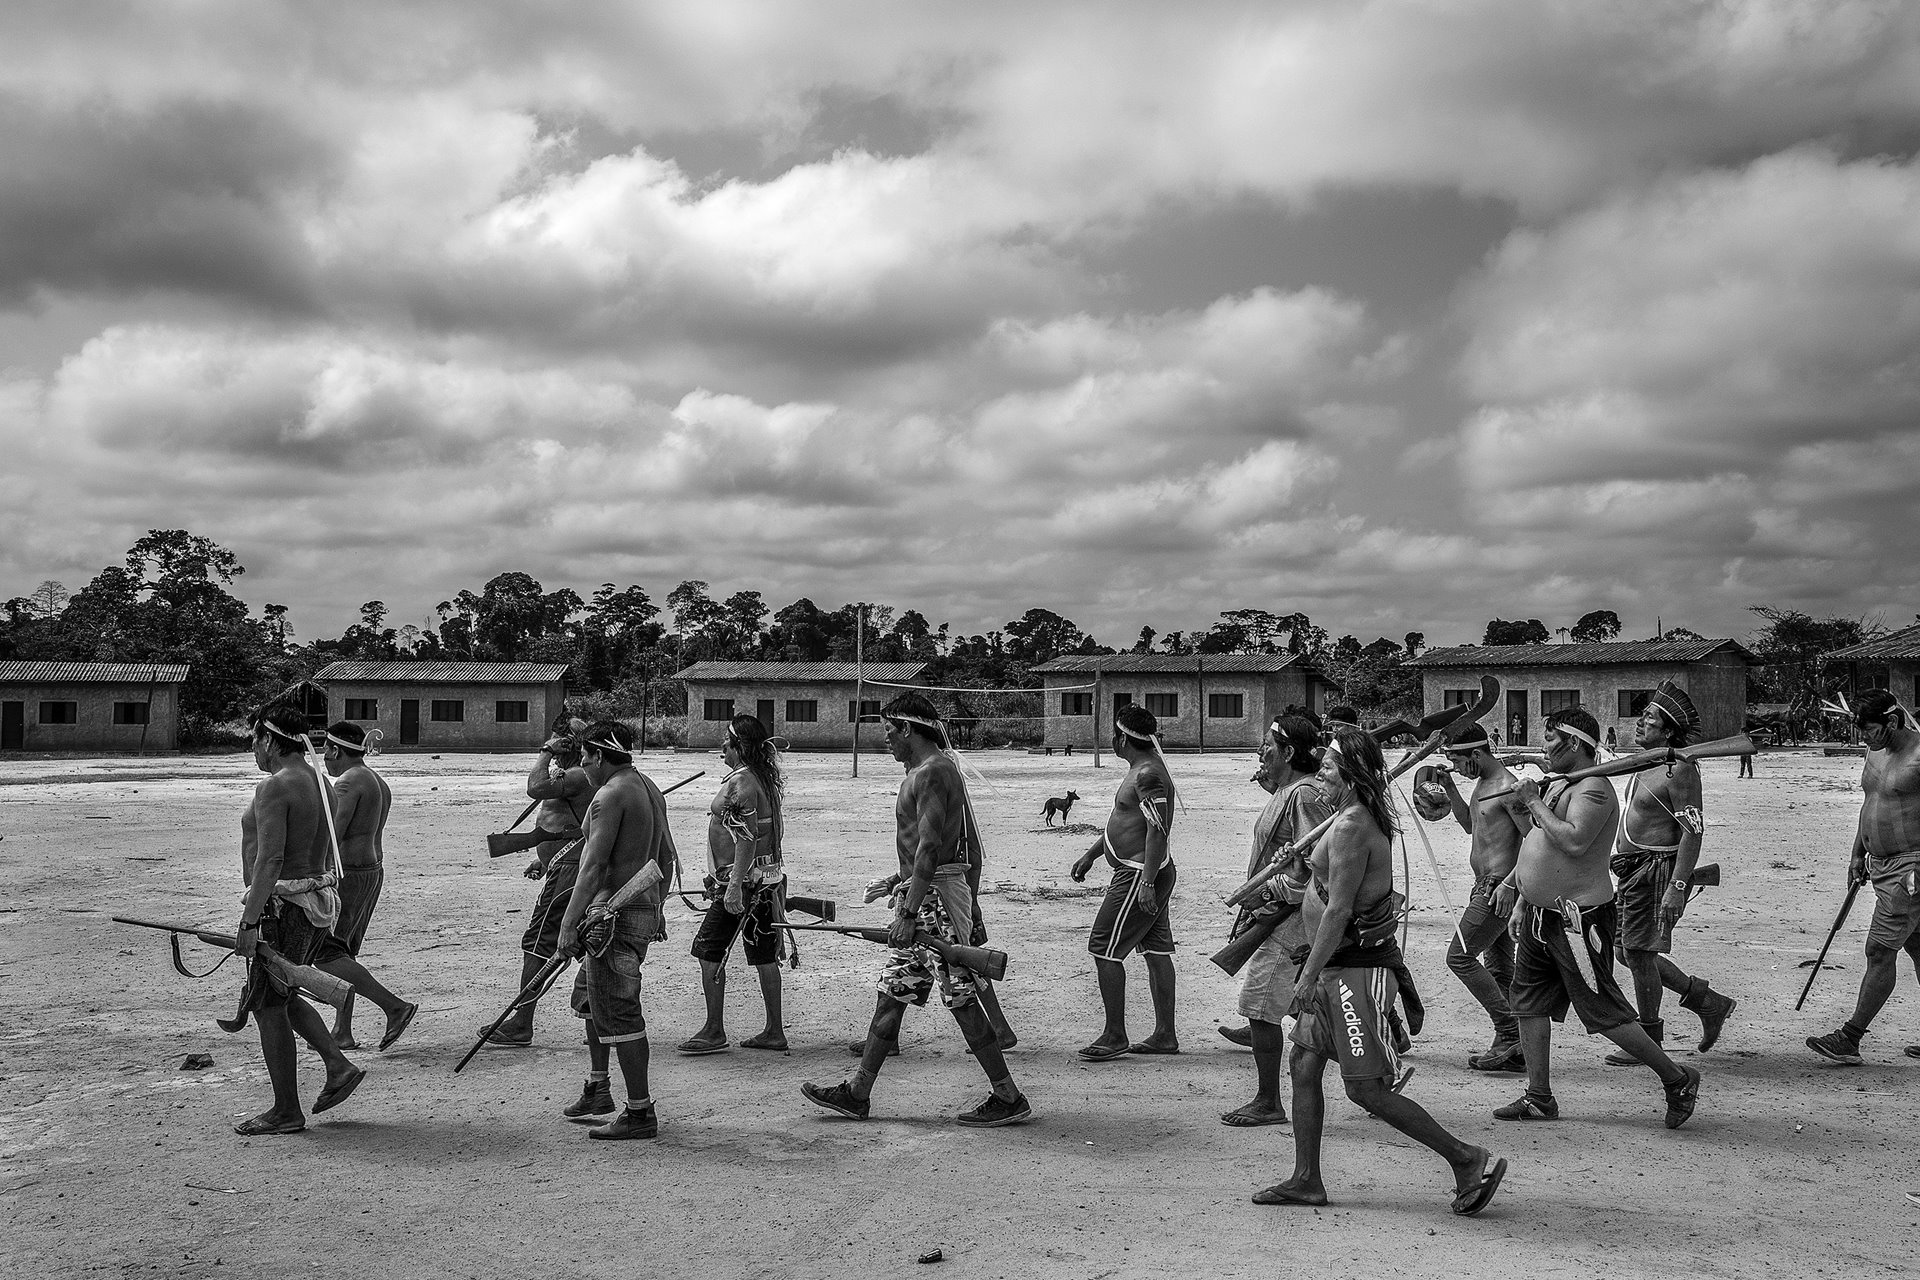 Xikrin warriors arrive at Rapko village, after an expedition to reclaim land that had been invaded and cleared by land-grabbers and illegal ranchers in Trincheira Bacajá Indigenous Land, in Pará, in the Brazilian Amazon. Faced with inaction by government authorities, the Xikrin had organized themselves to defend their territory and fight against deforestation.